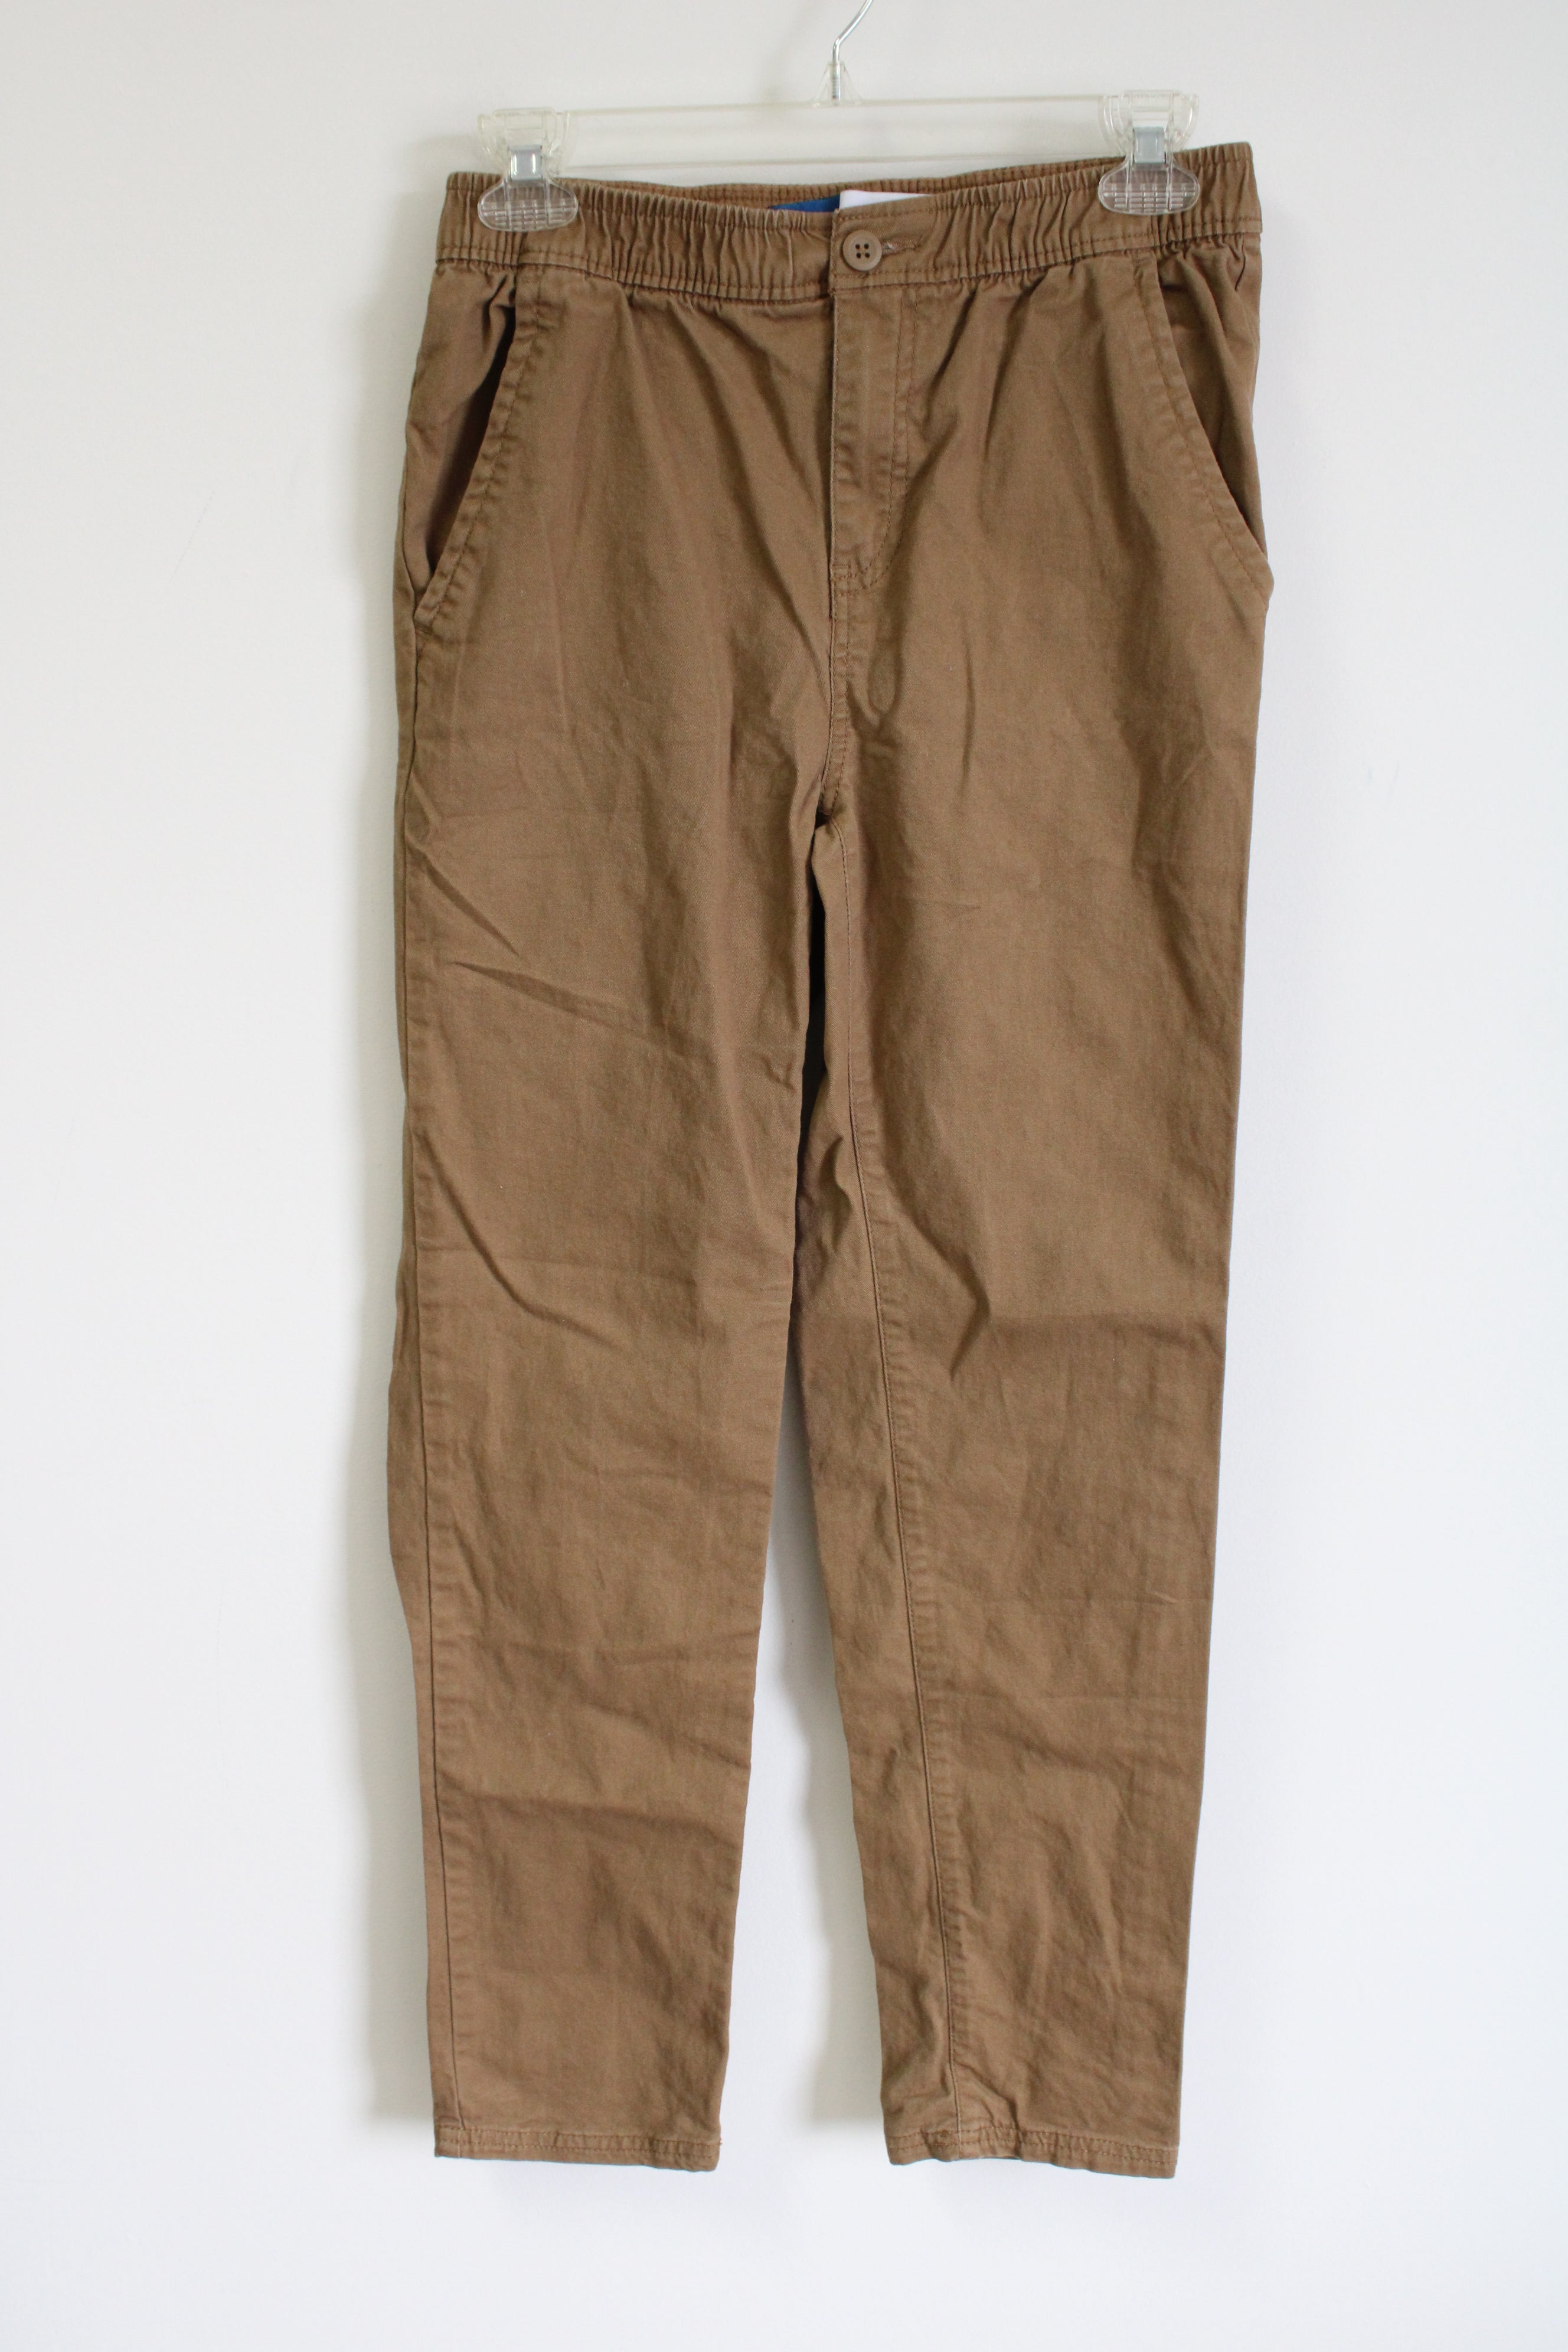 Old Navy Taper Built-In Flex Khaki Jogger Pant | Youth XL (14/16)